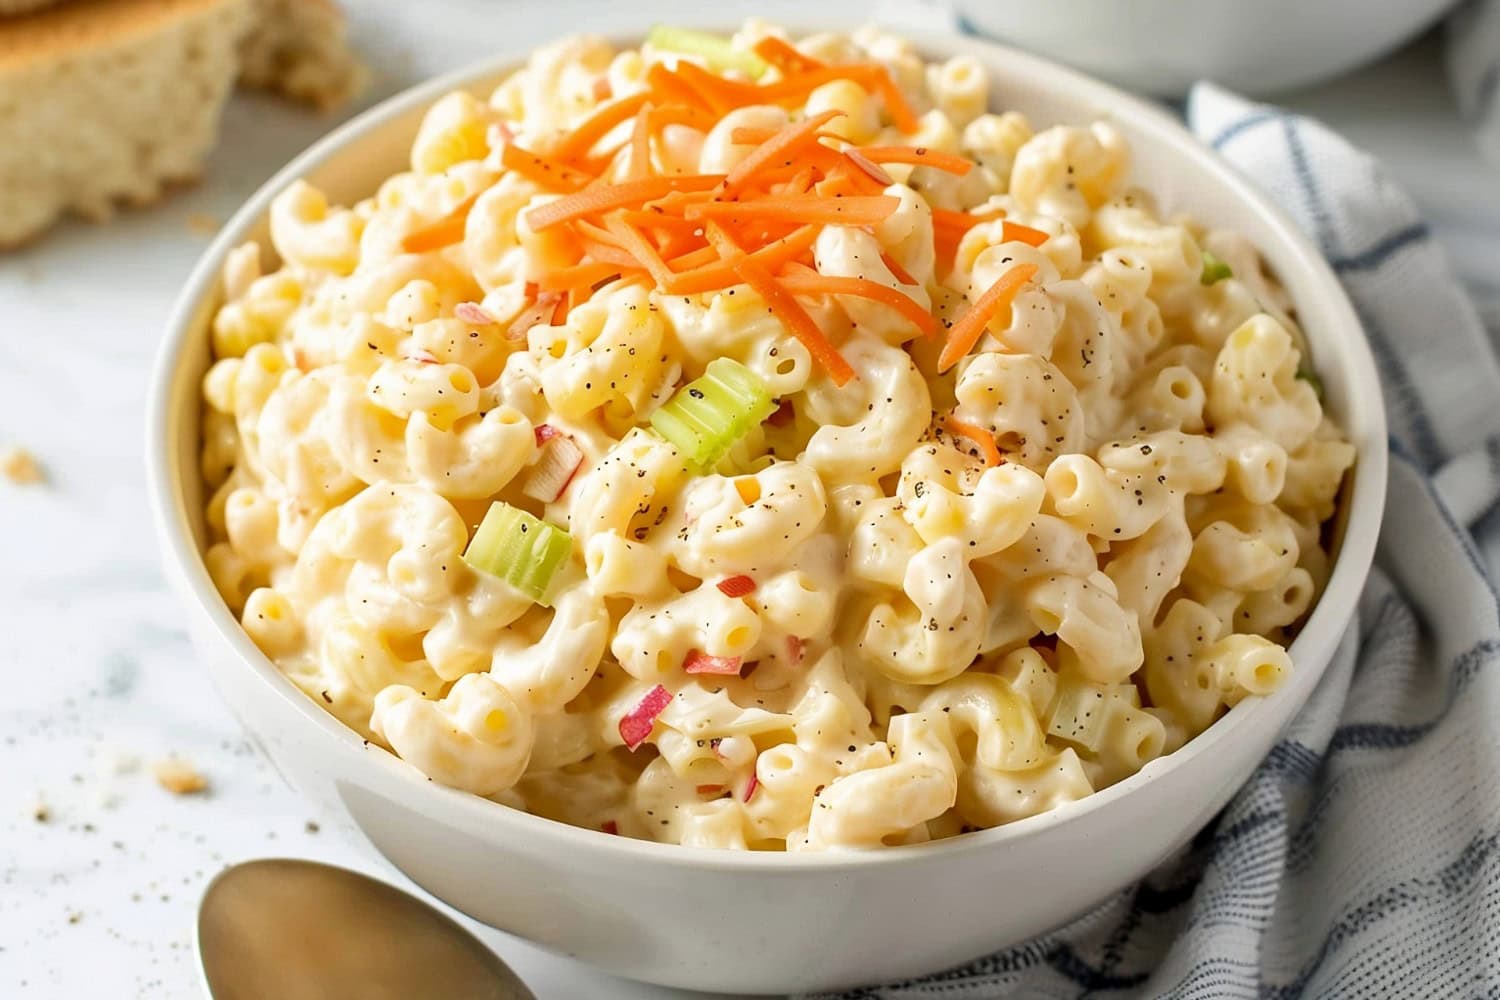 Homemade Hawaiian-style macaroni salad with carrots and celery, a refreshing side dish that pairs perfectly with grilled meats and seafood